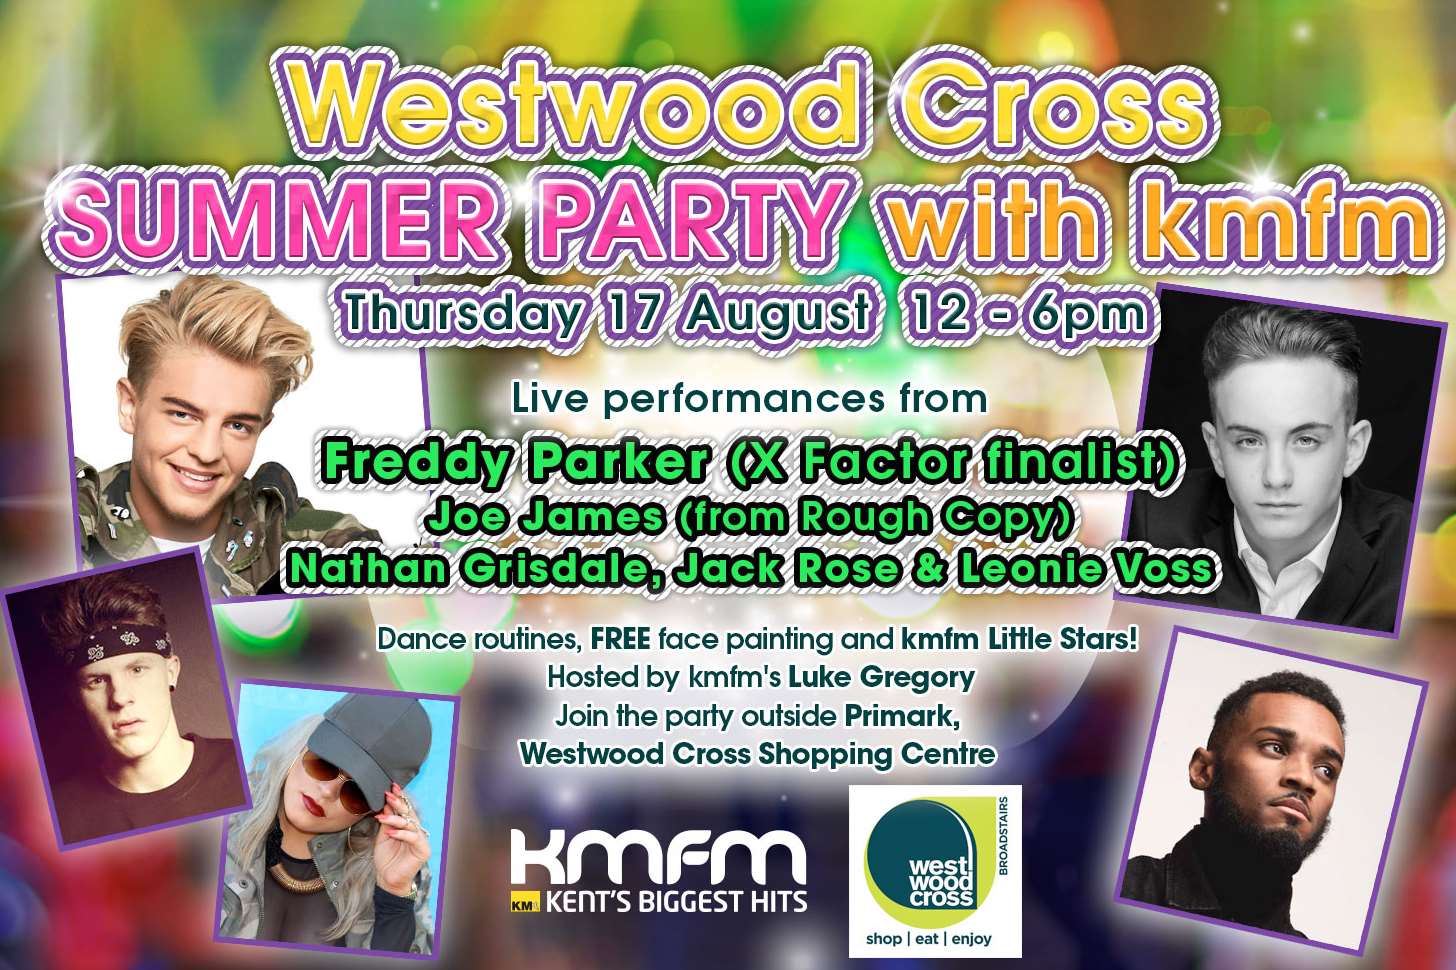 The Summer Party takes place today